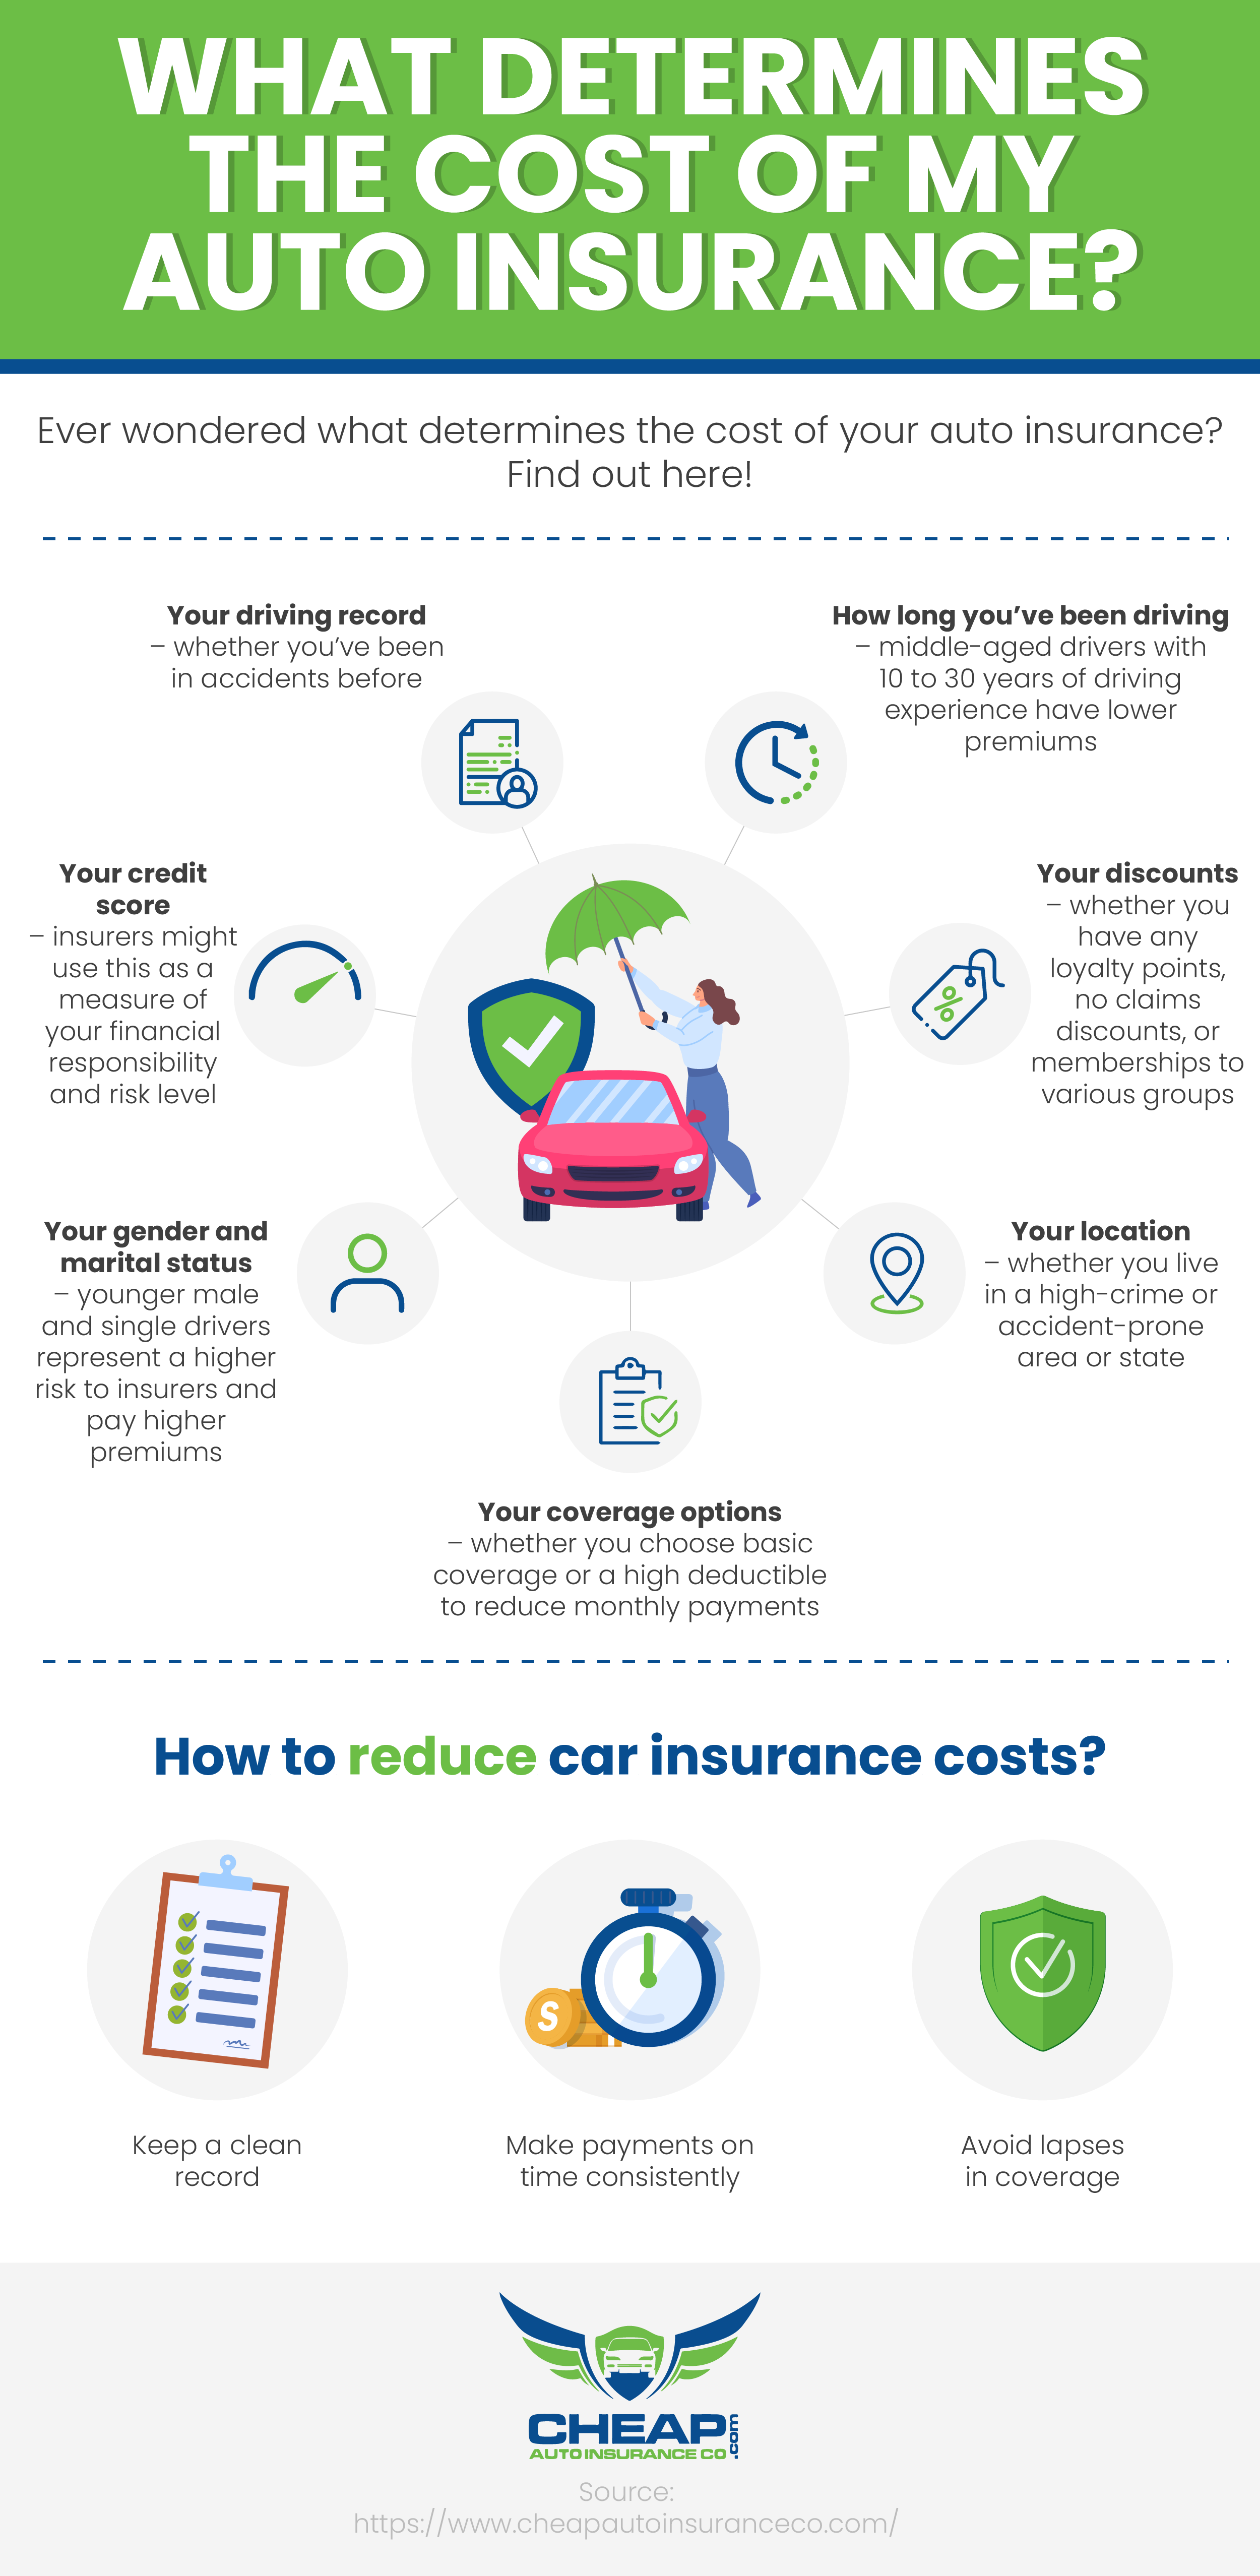 What determines the cost of my auto insurance?